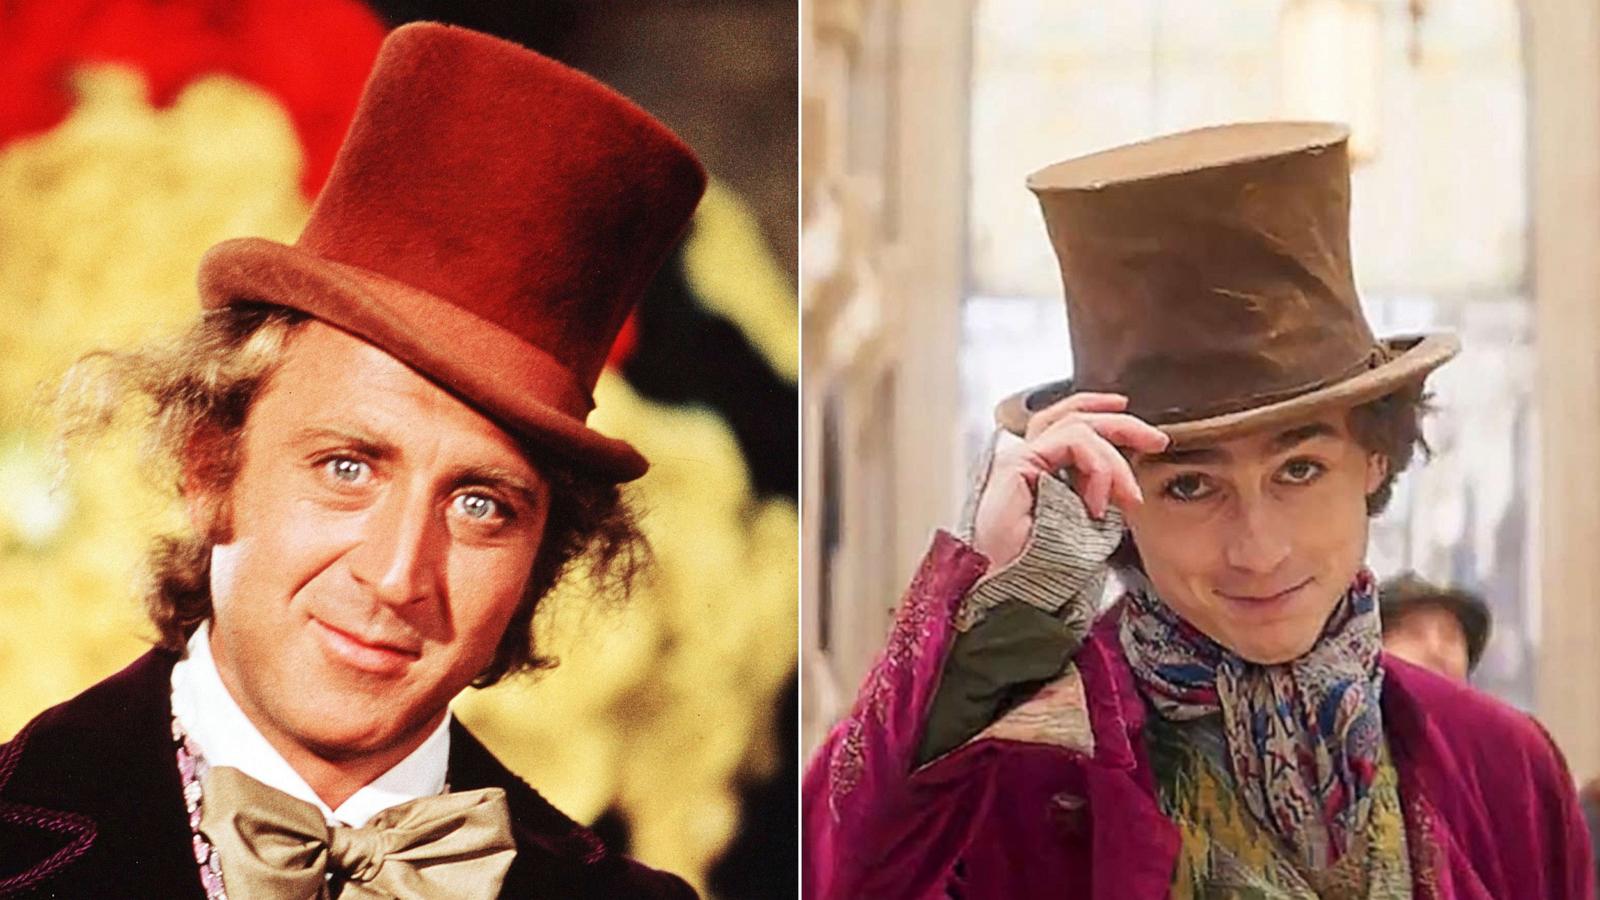 Timothee Chalamet drops first look photo showing him as Willy Wonka